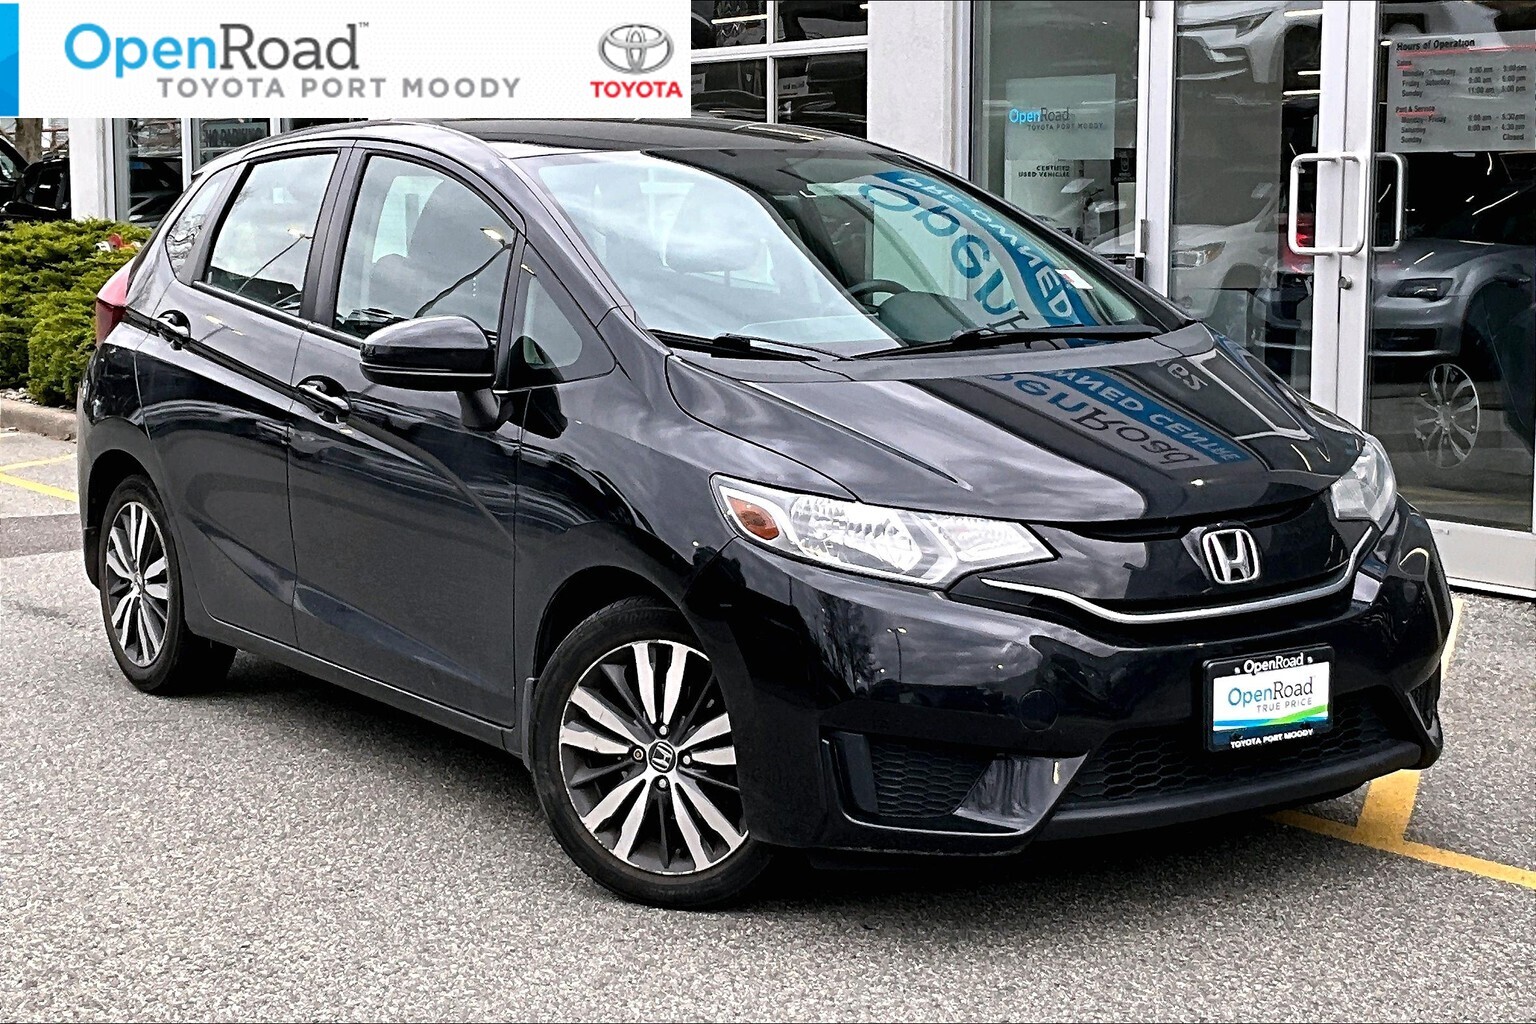 2017 Honda Fit SE CVT |OpenRoad True Price |Local |One Owner |Ful